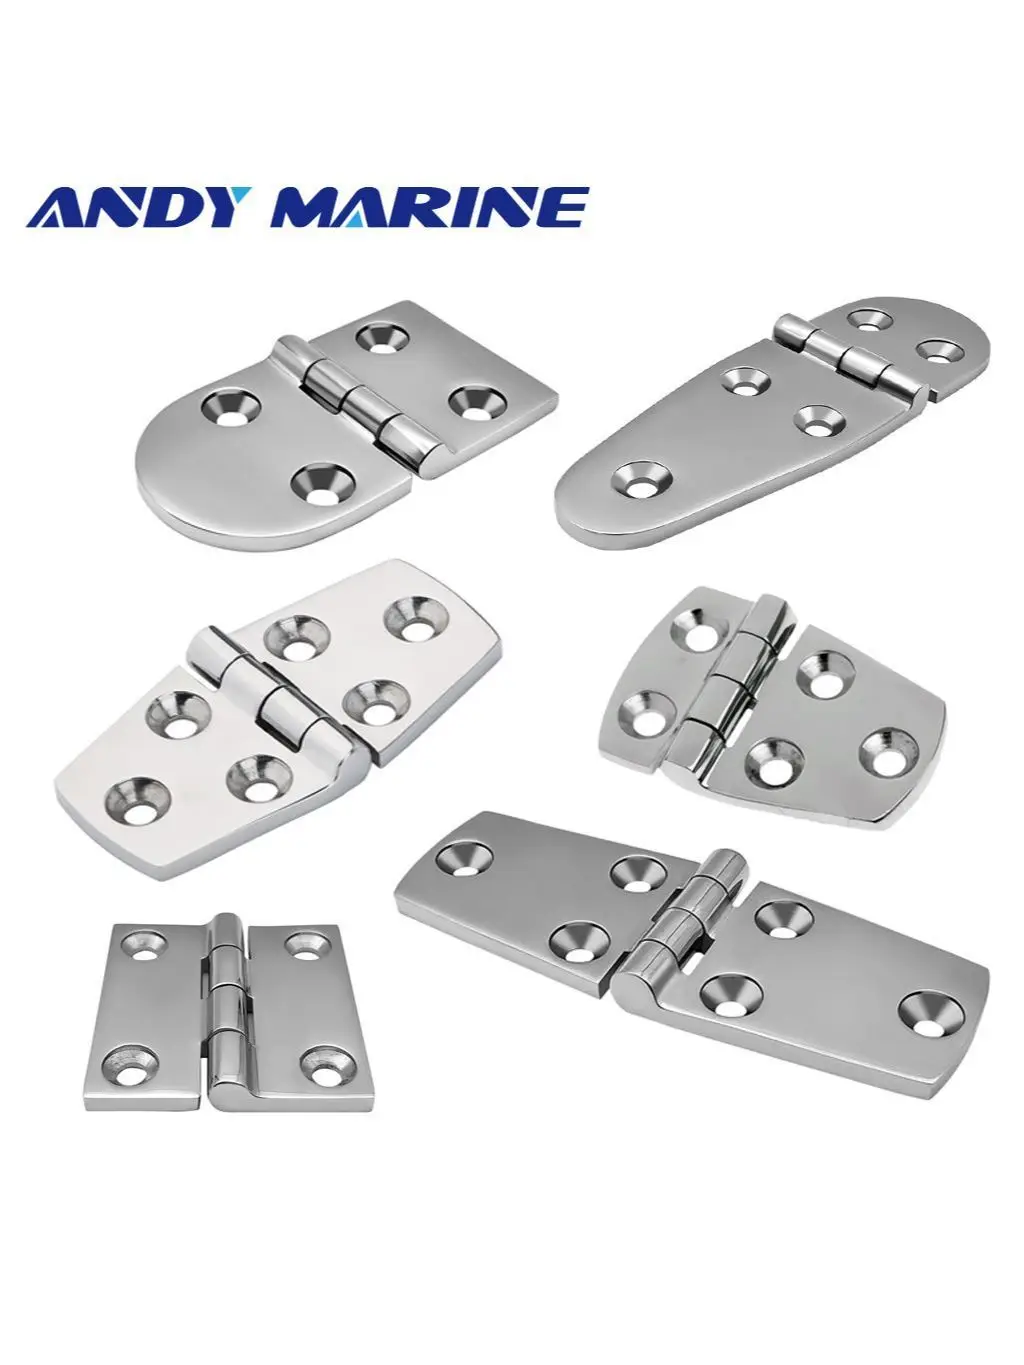 Andymarine Heavy Stainless Steel Casting Hinge Flat Hinge Cabinet Doors For Windows Hinge Wooden Box Hinge Thickness 2pcs 2 inches stainless steel flat hinge cabinet doors windows wooden box hinge